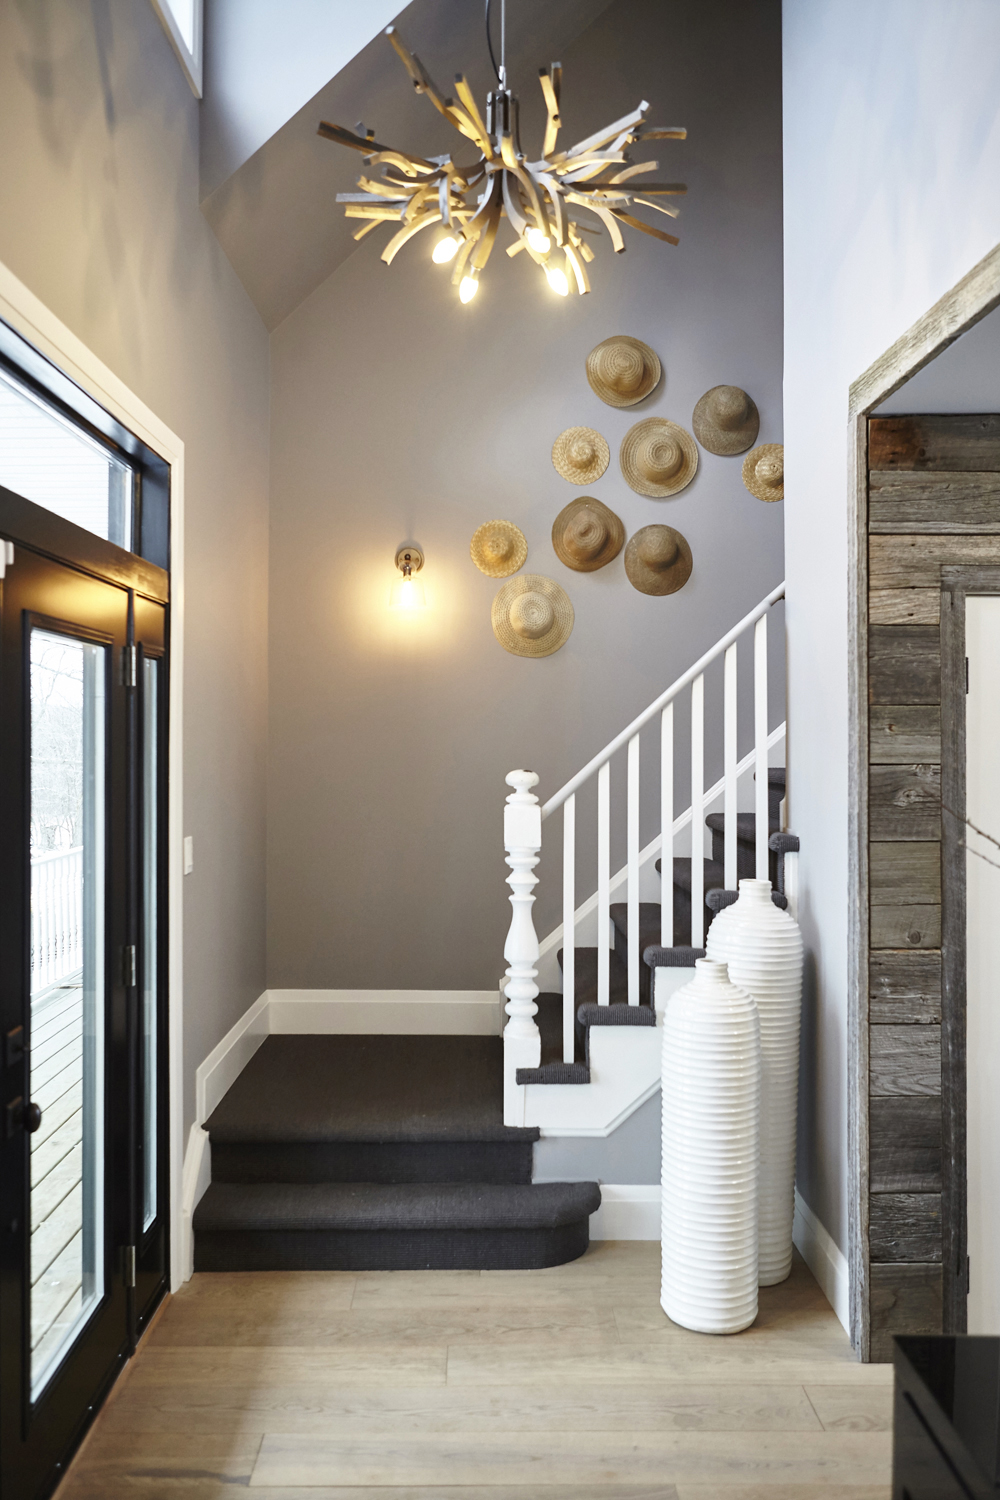 A pristine entryway with a carpeted spiral staircase, decorative hats mounted on the wall and unique light fixture